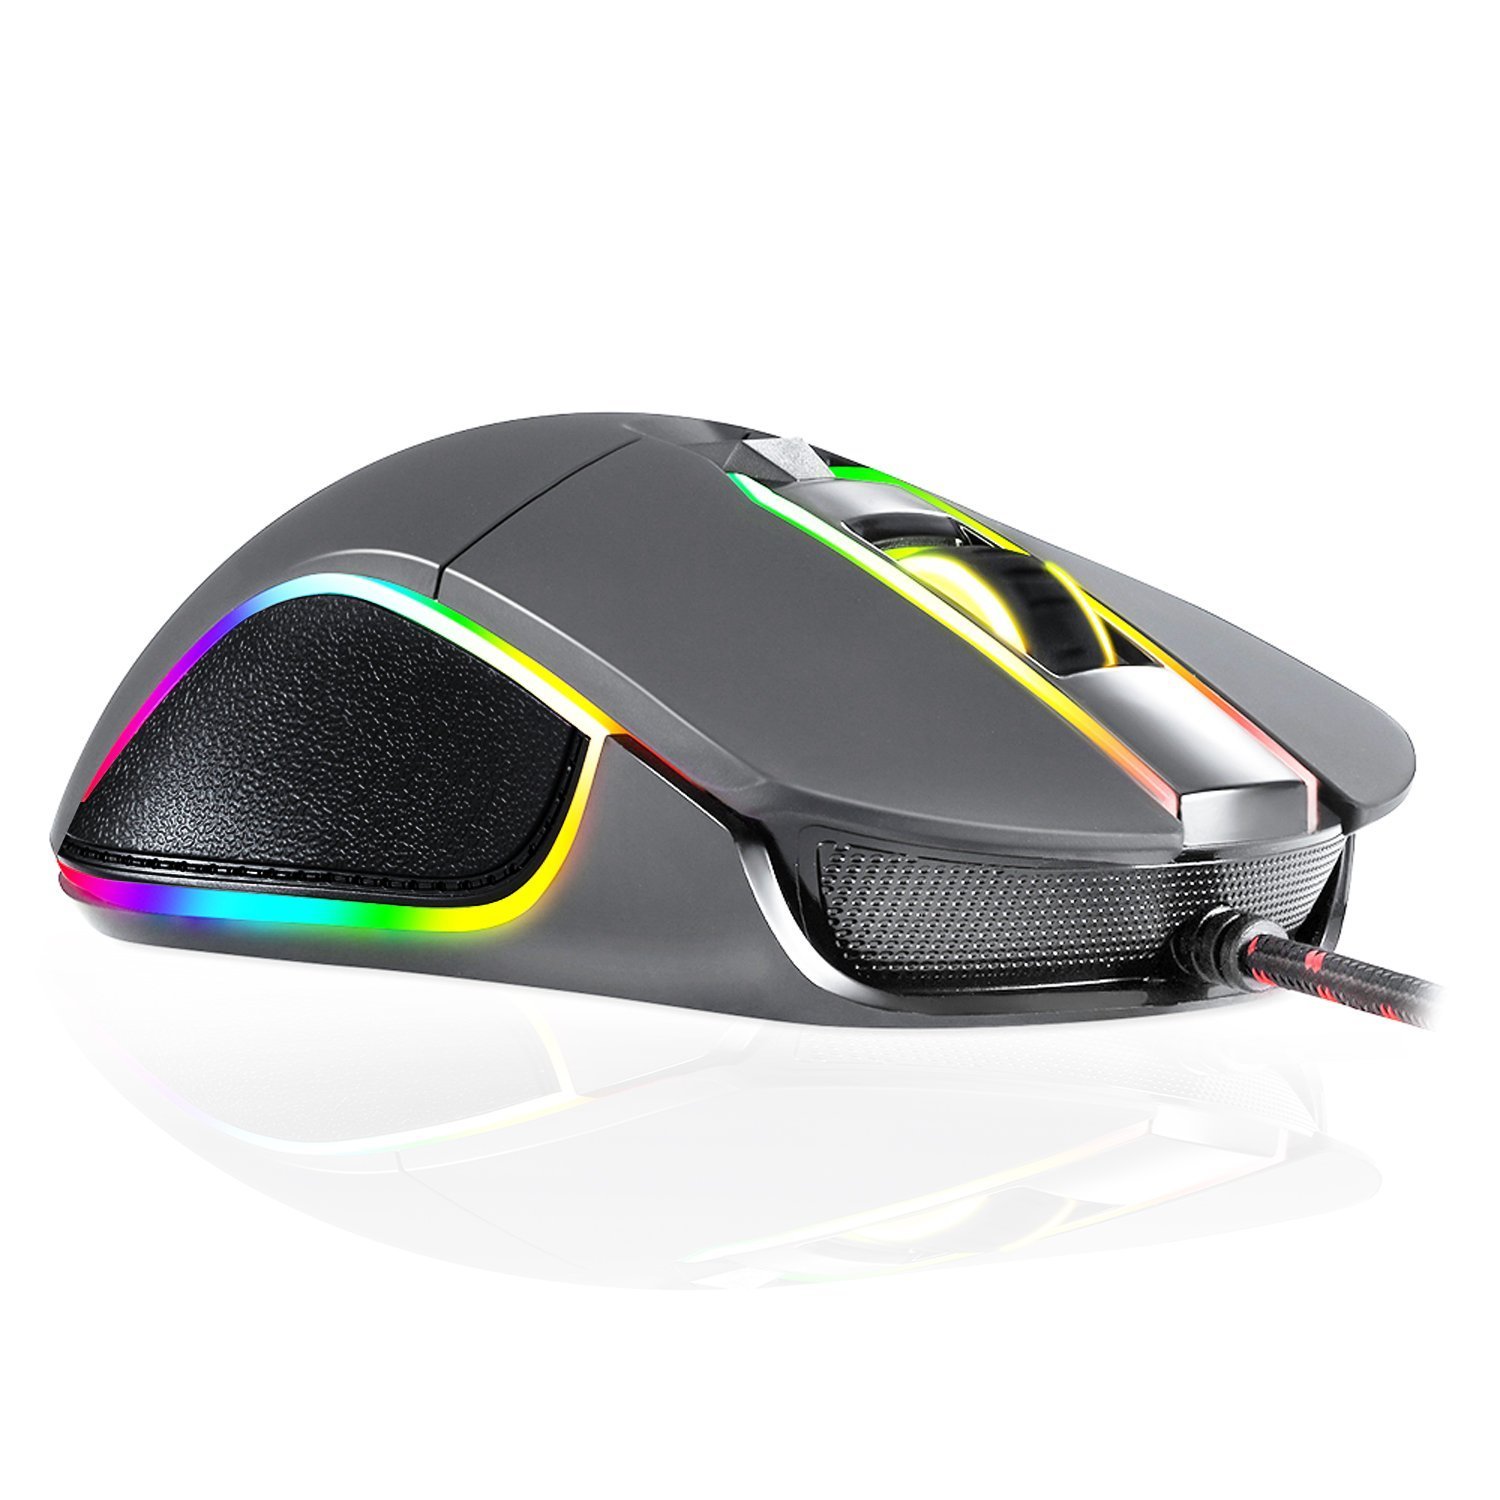  KLIM Aim Gaming Mouse - Wired Ergonomic Gamer USB Computer  Mice, Chroma RGB Mouse [7000 DPI] [Programmable Buttons] Ambidextrous,  Ergonomic for Desktop PC Laptop, High Precision Optical, Grey : Video Games